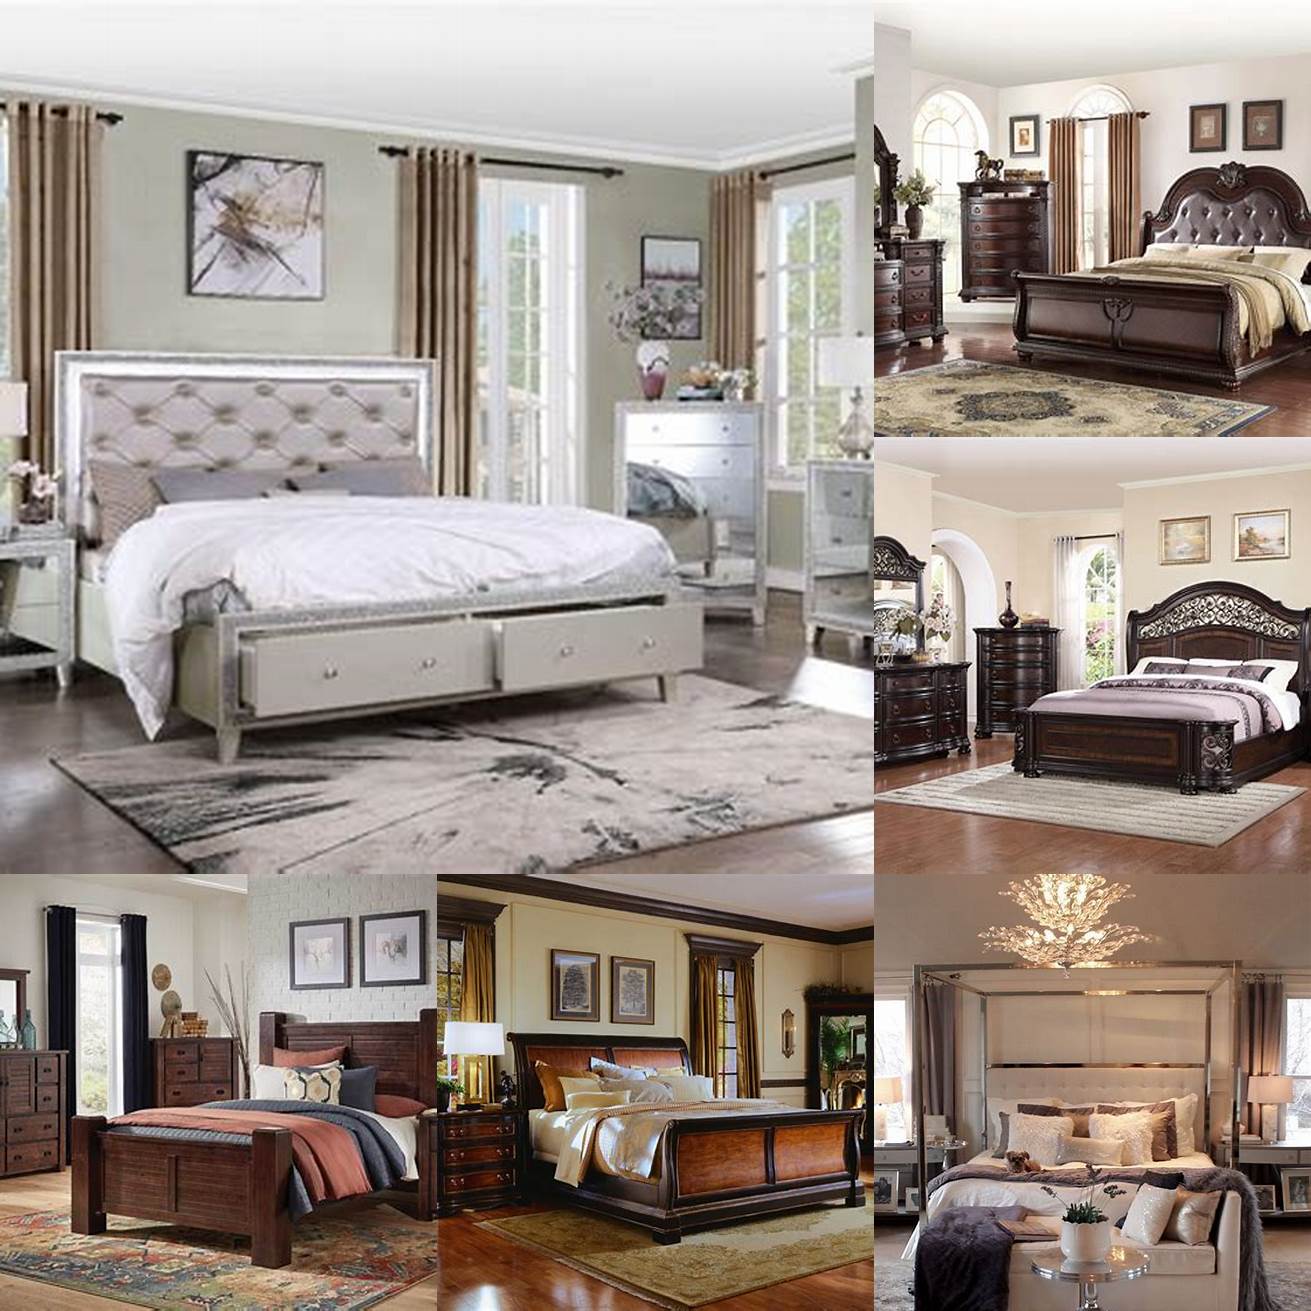 Consider the rest of your bedroom When choosing a bedroom set consider the rest of your bedroom Choose a set that complements the existing decor rather than clashes with it